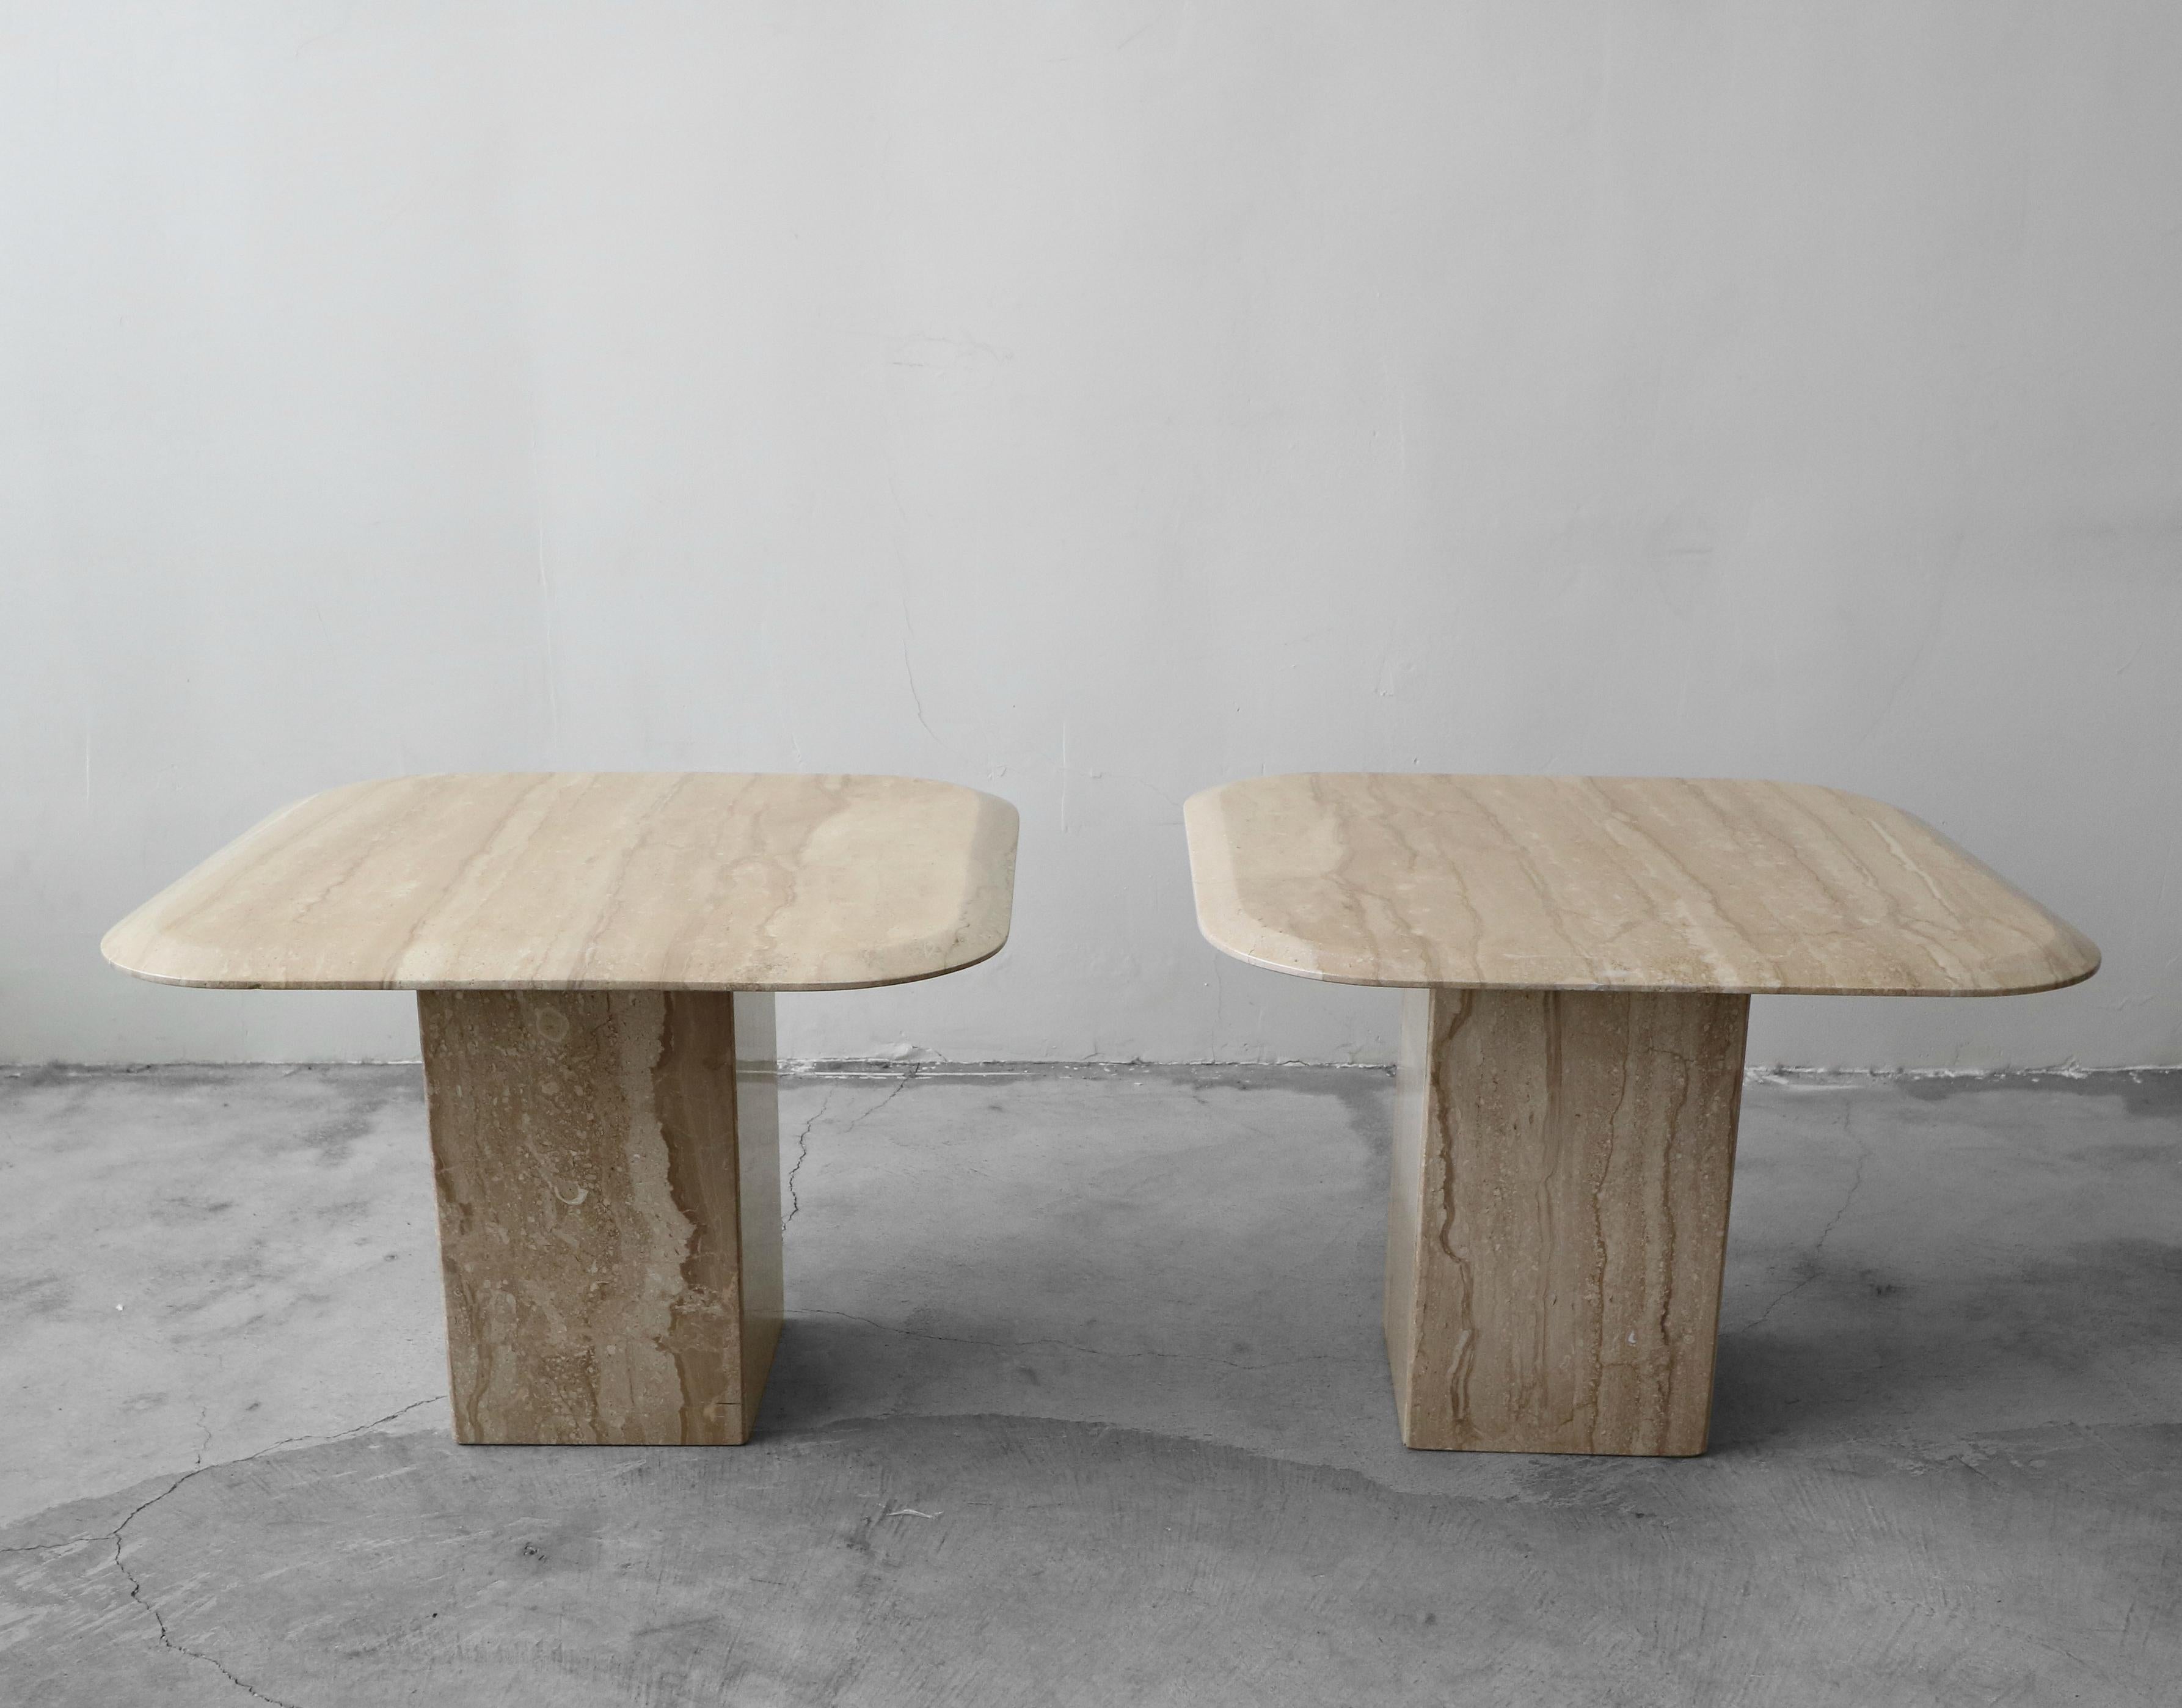 A beautiful pair of square Italian travertine side tables. Tables are polished and feature a clean beveled edge, seldom seen on travertine. Travertine is cream and beige in color with stunning natural details.

Tables are 2 separate pieces, a